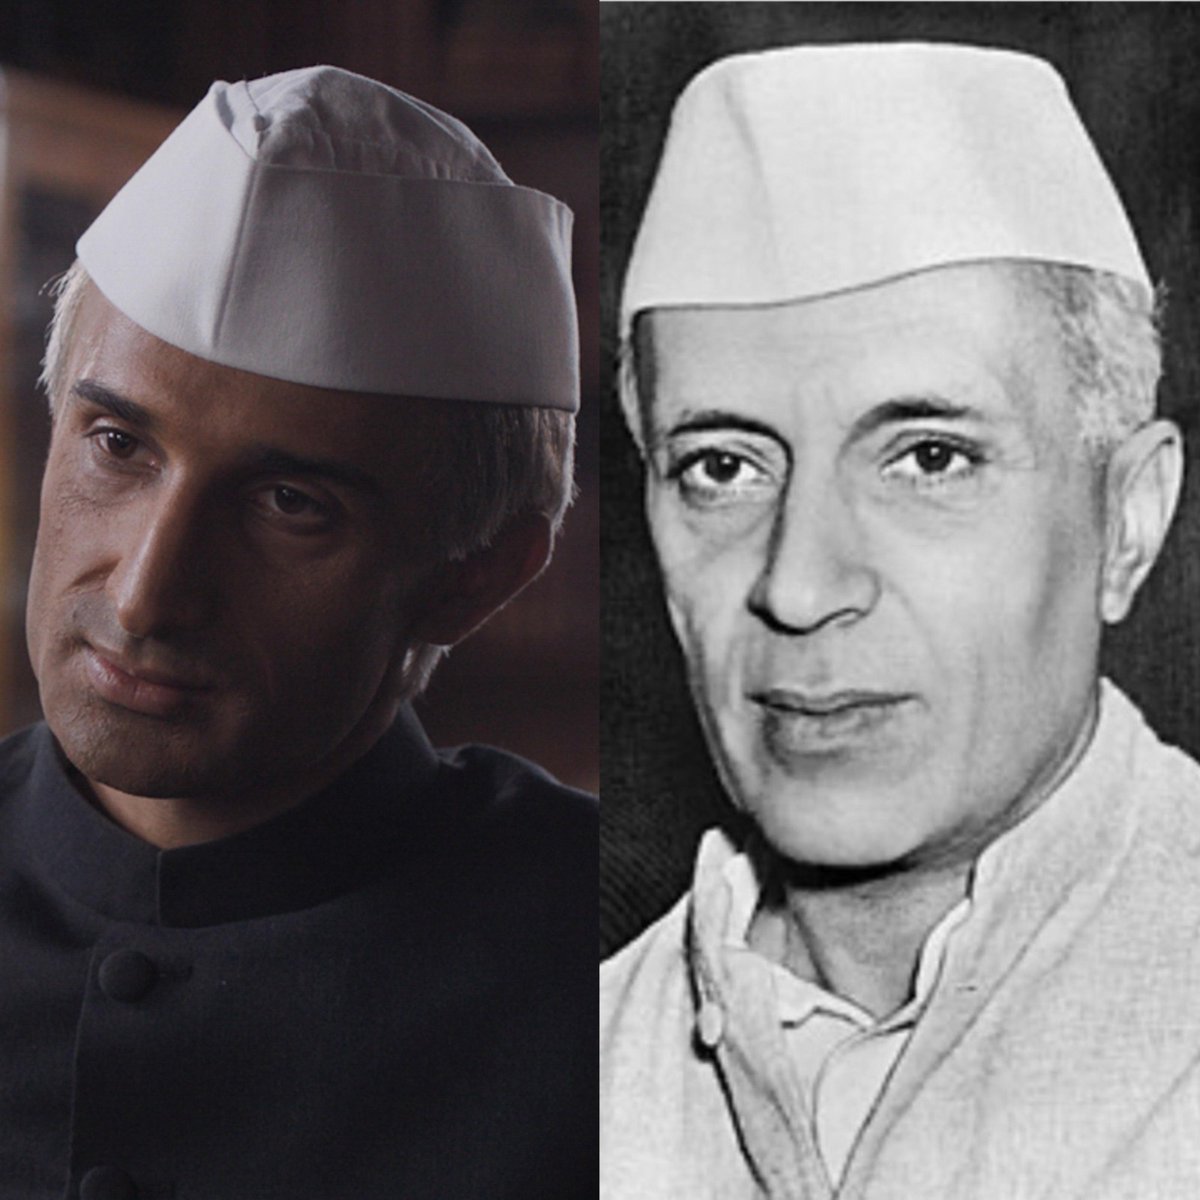 Did you know that Jawaharlal  Nehru is the first and only PM to have served the country for 16 years?

It's #FreedomAtMidnight ..